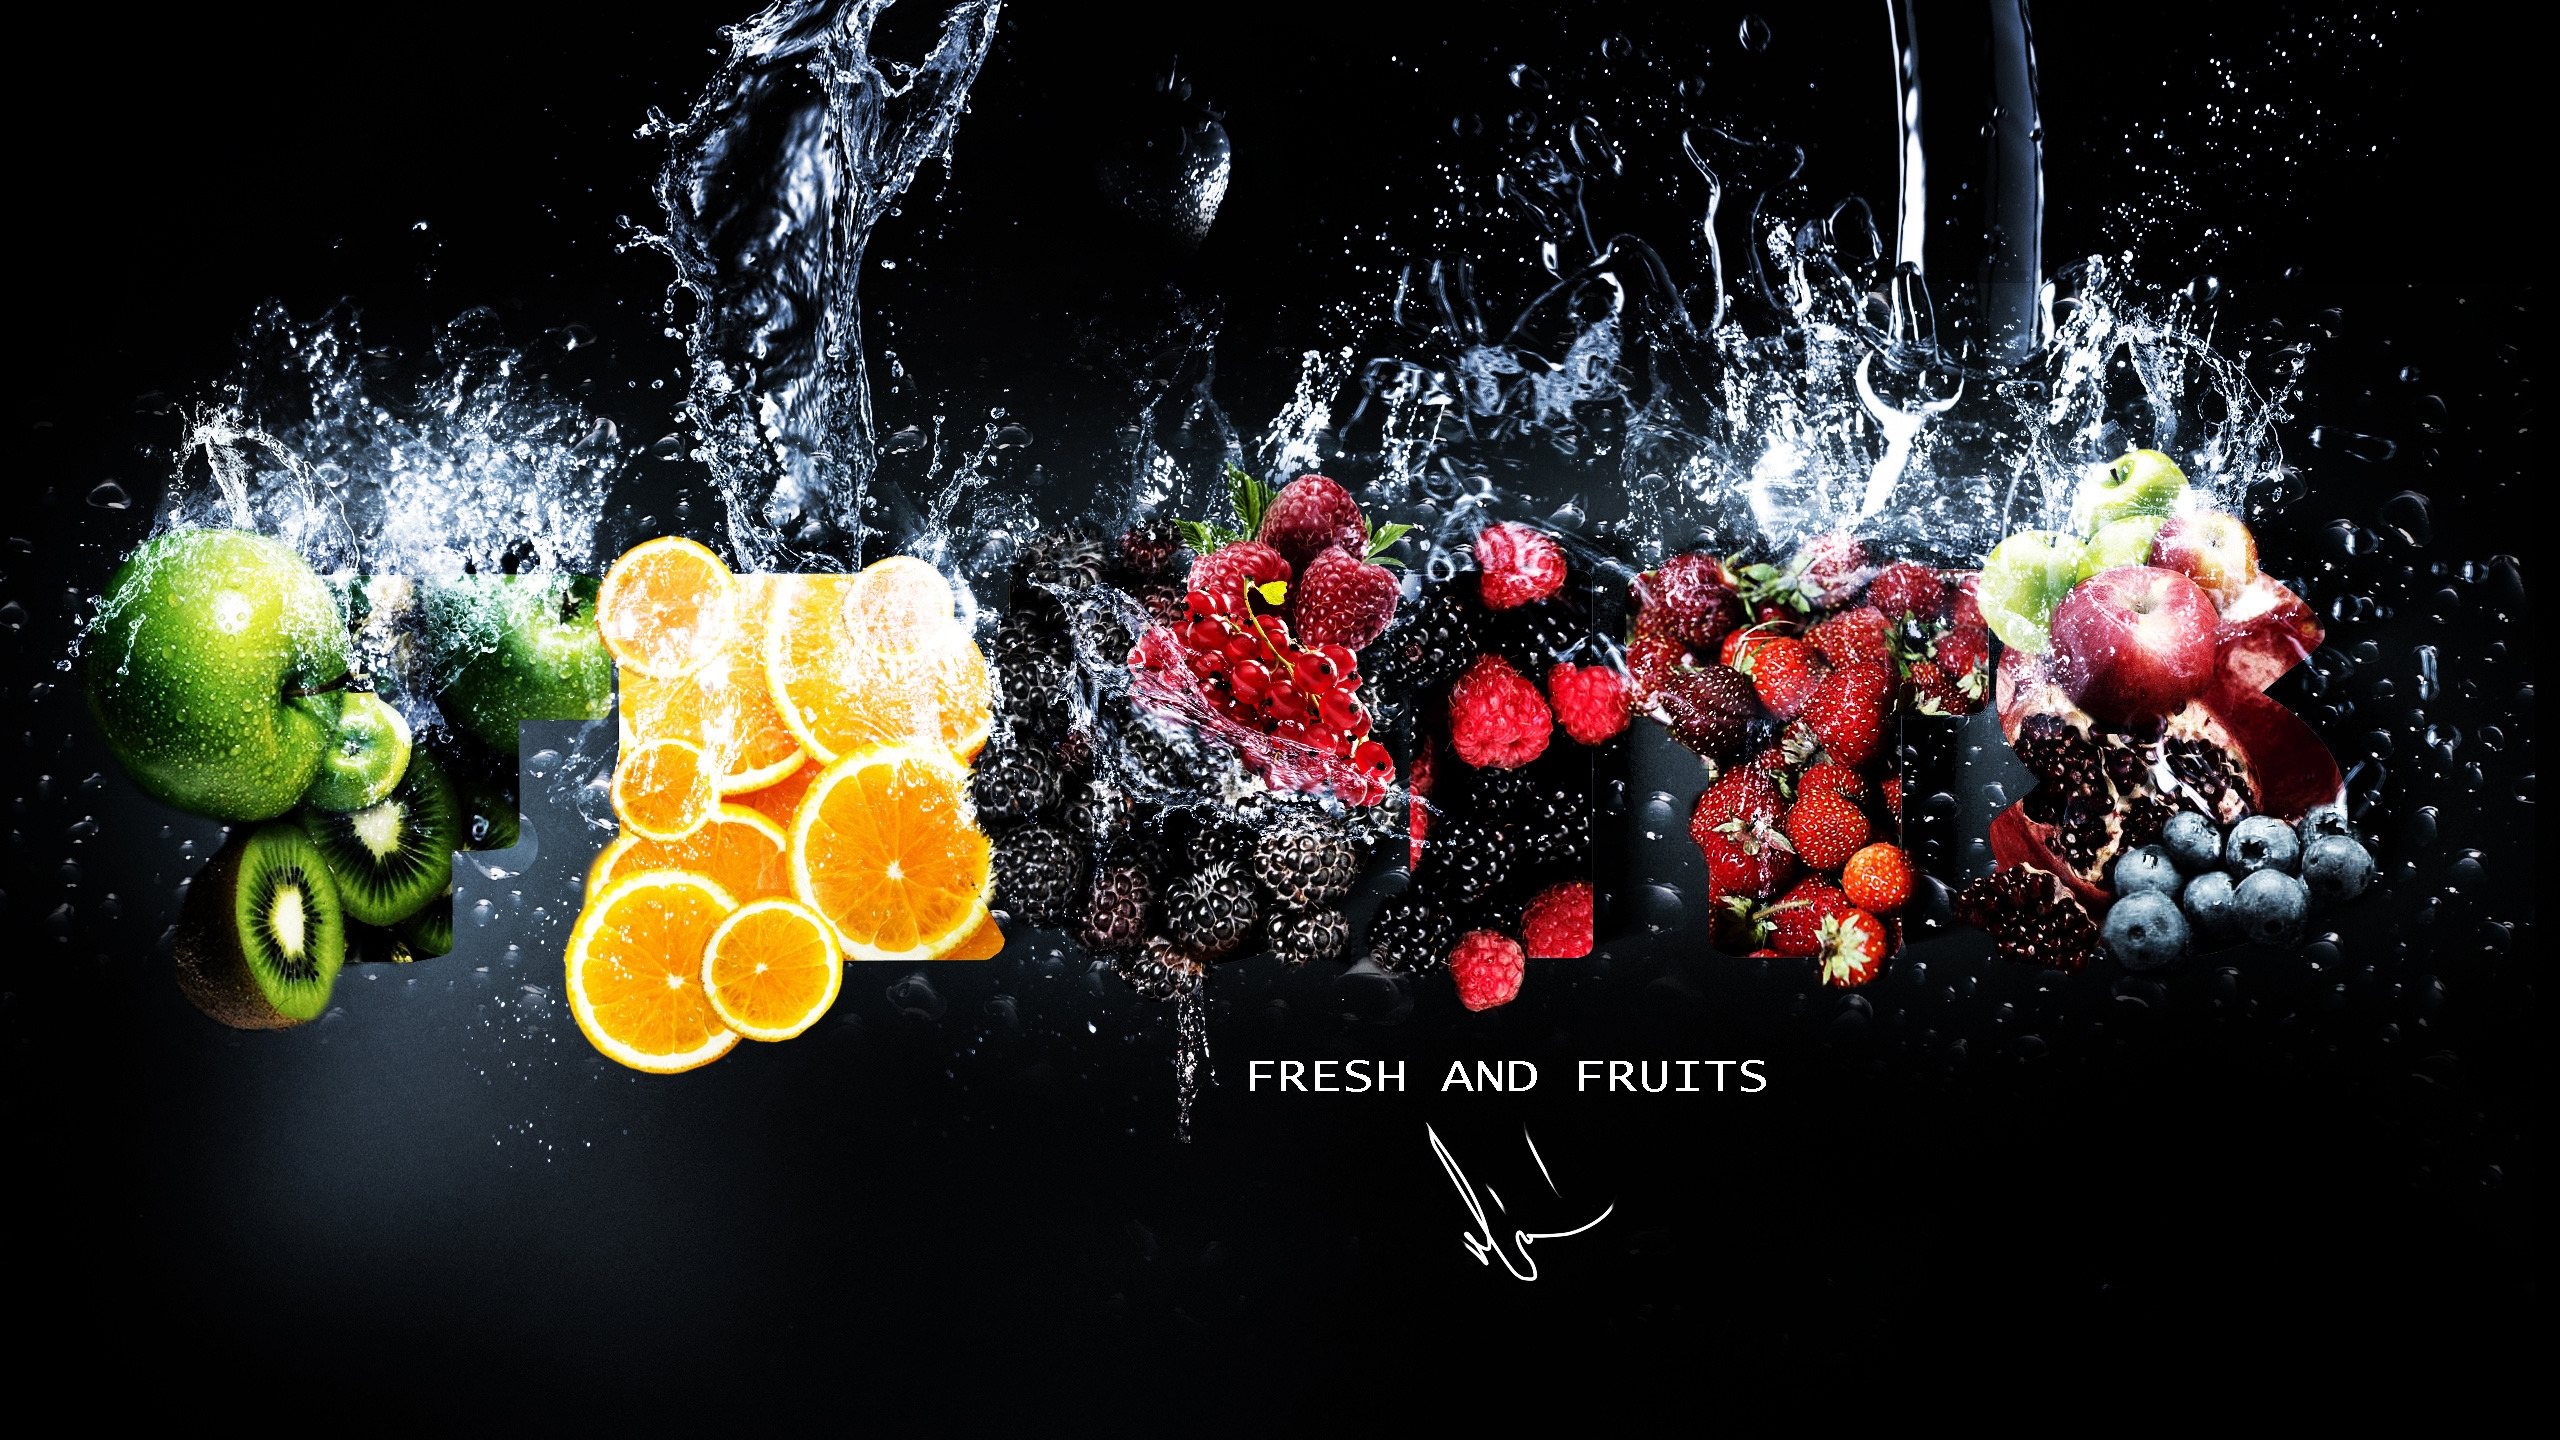 Fresh Fruits in Water for 2560x1440 HDTV resolution